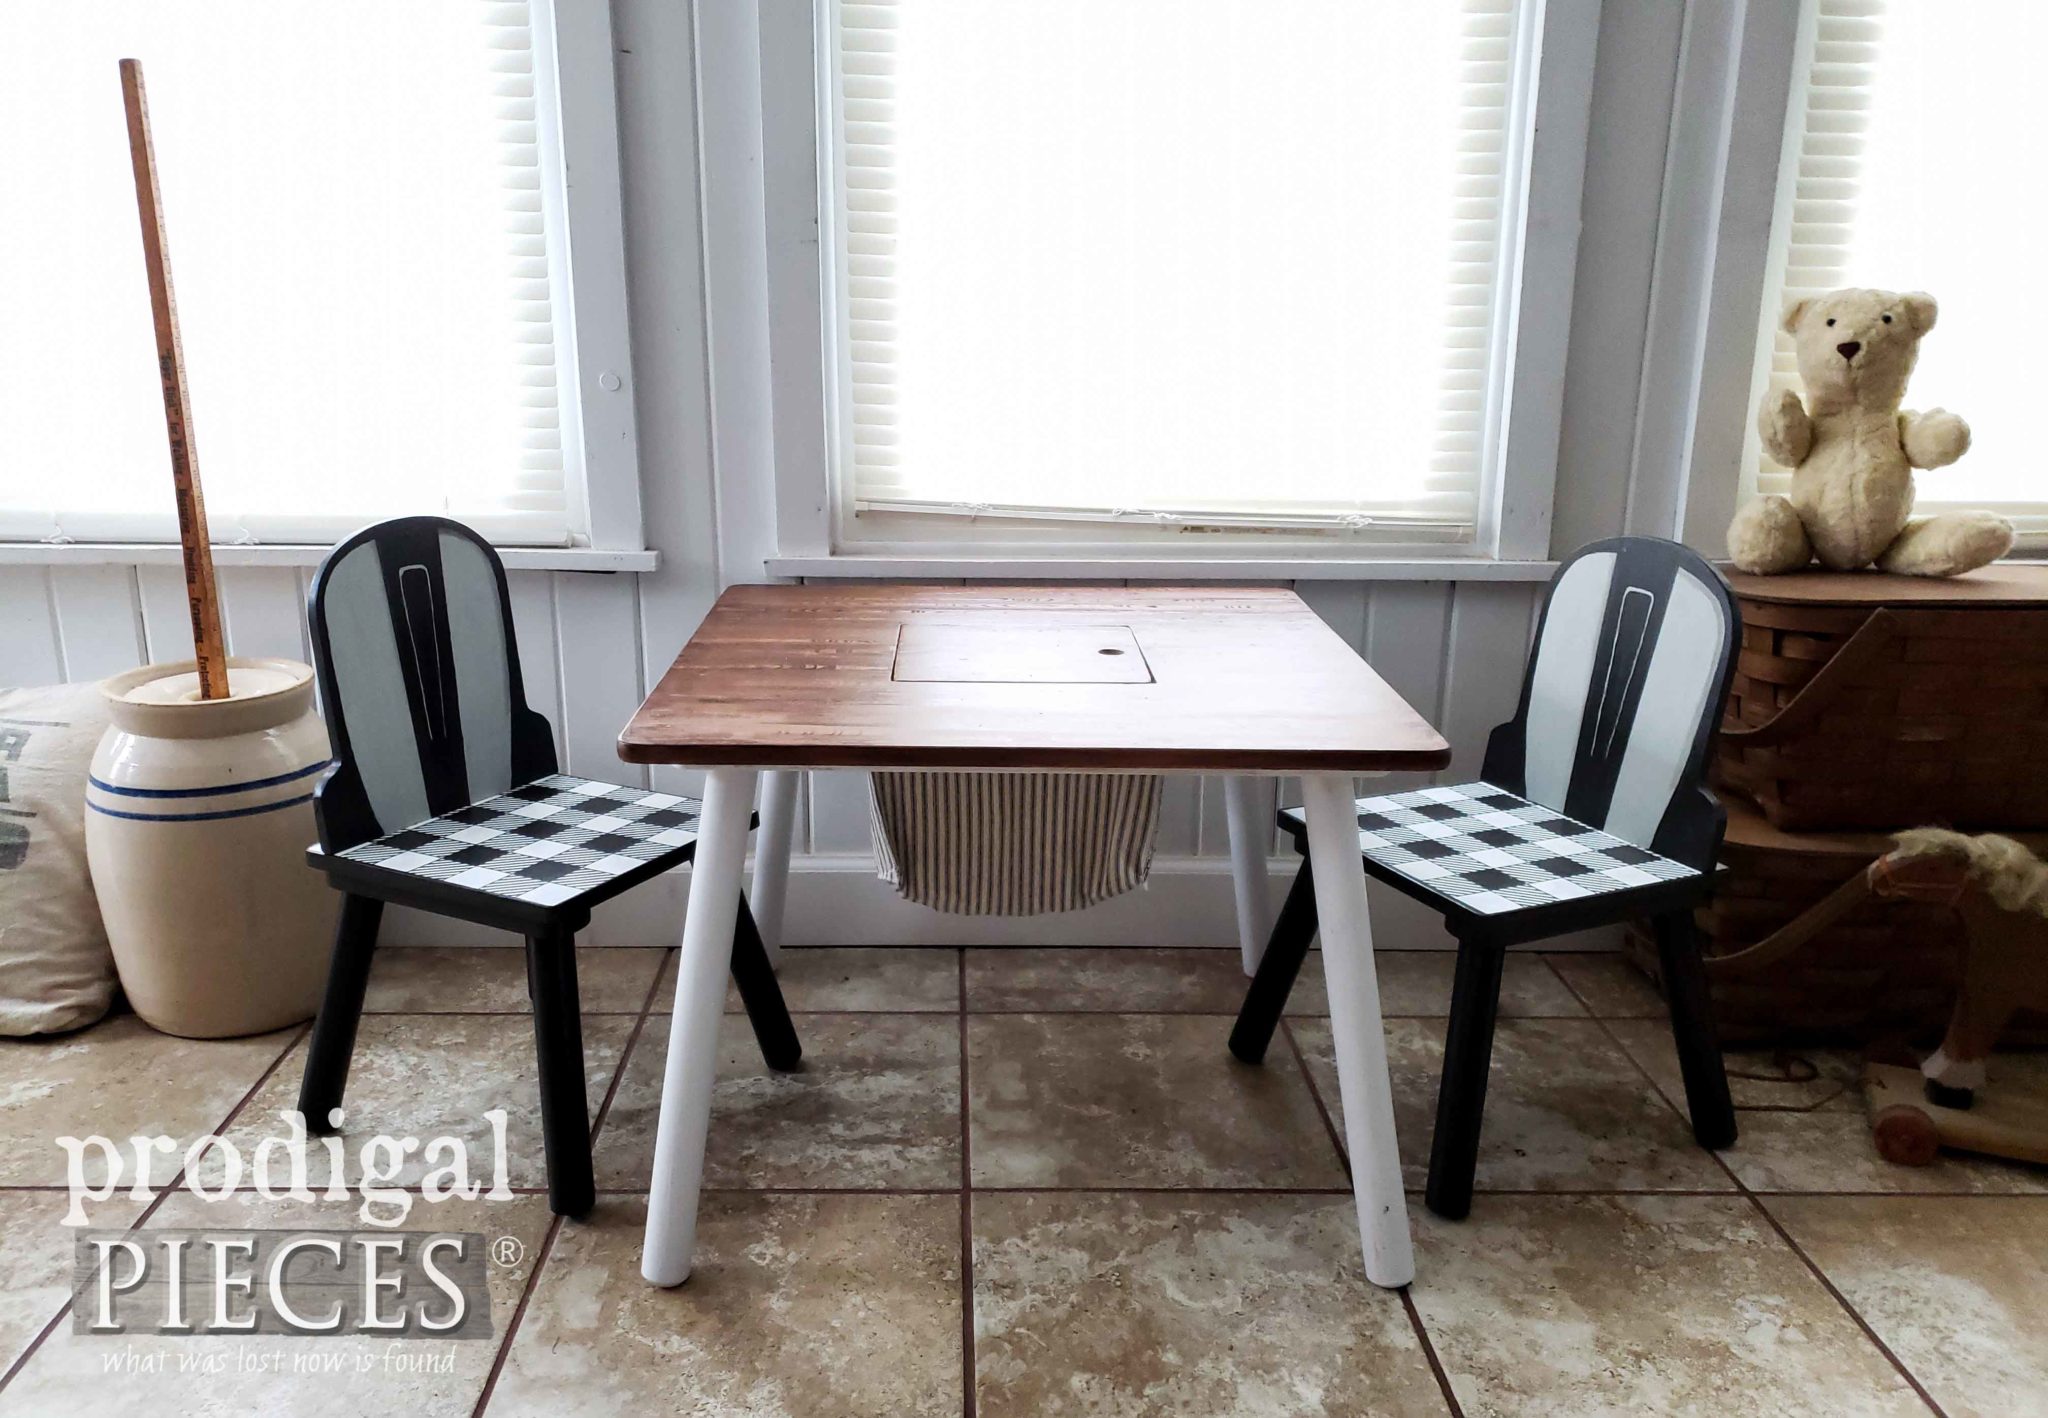 A Winnie the Pooh Kids Play Table gets Modern Farmhouse Makeover with Video Tutorial by Larissa of Prodigal Pieces | prodigalpieces.com #prodigalpieces